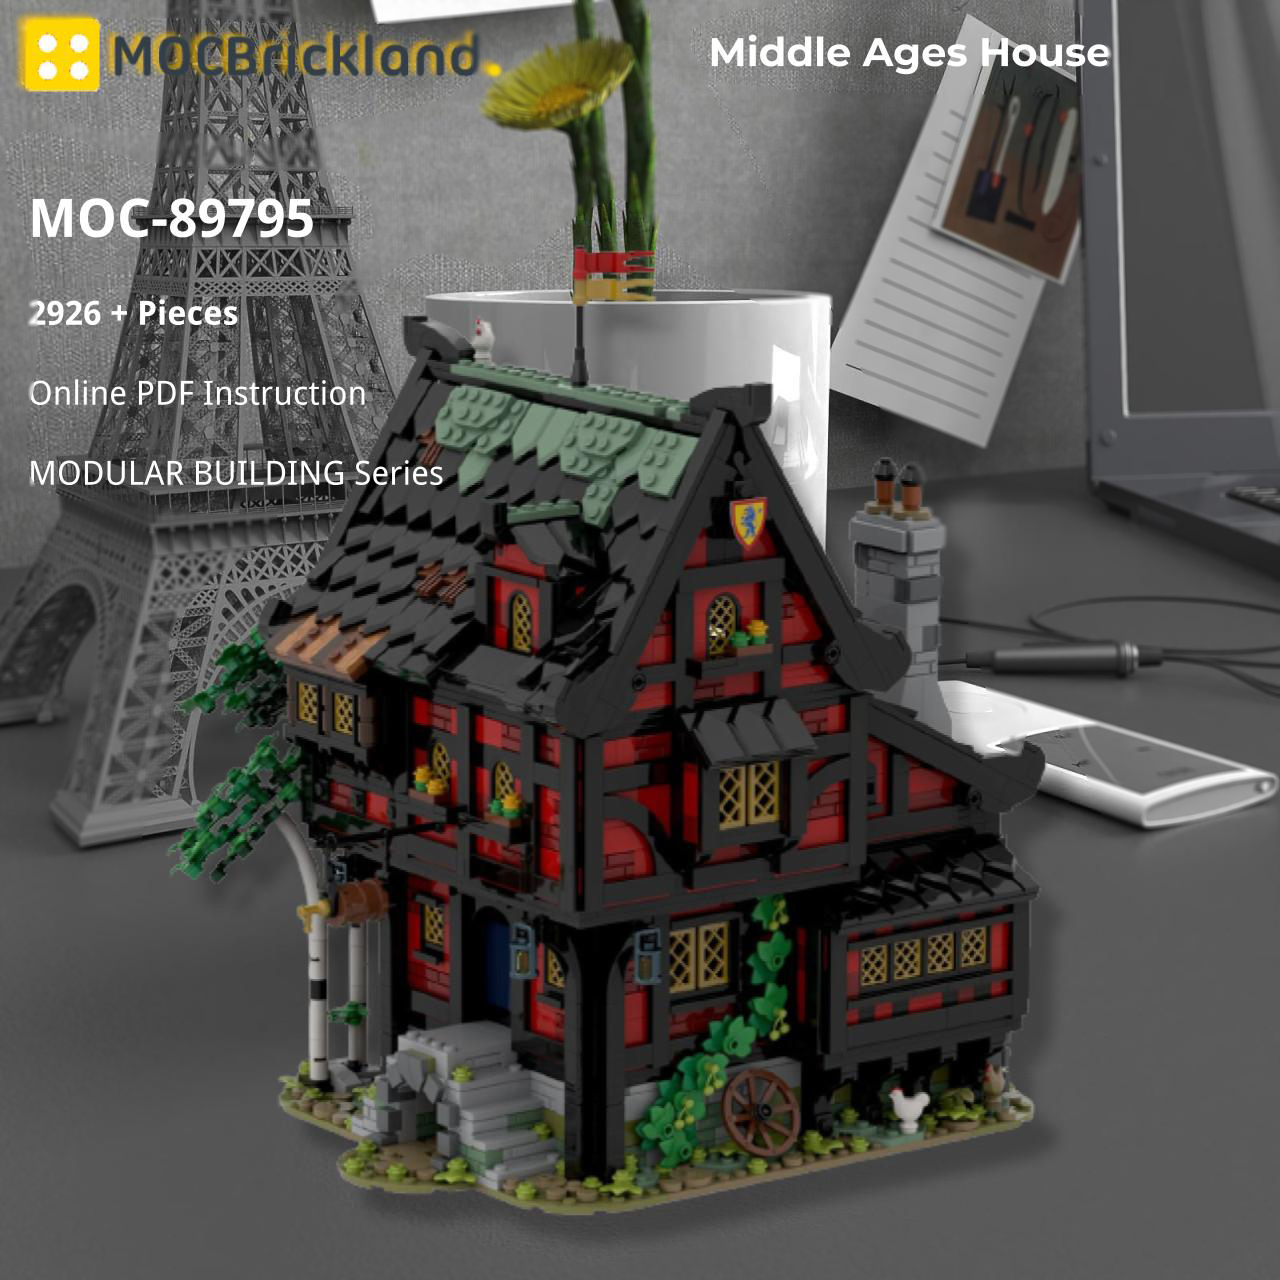 Middle Ages House MODULAR BUILDING MOC-89795 WITH 2926 PIECES